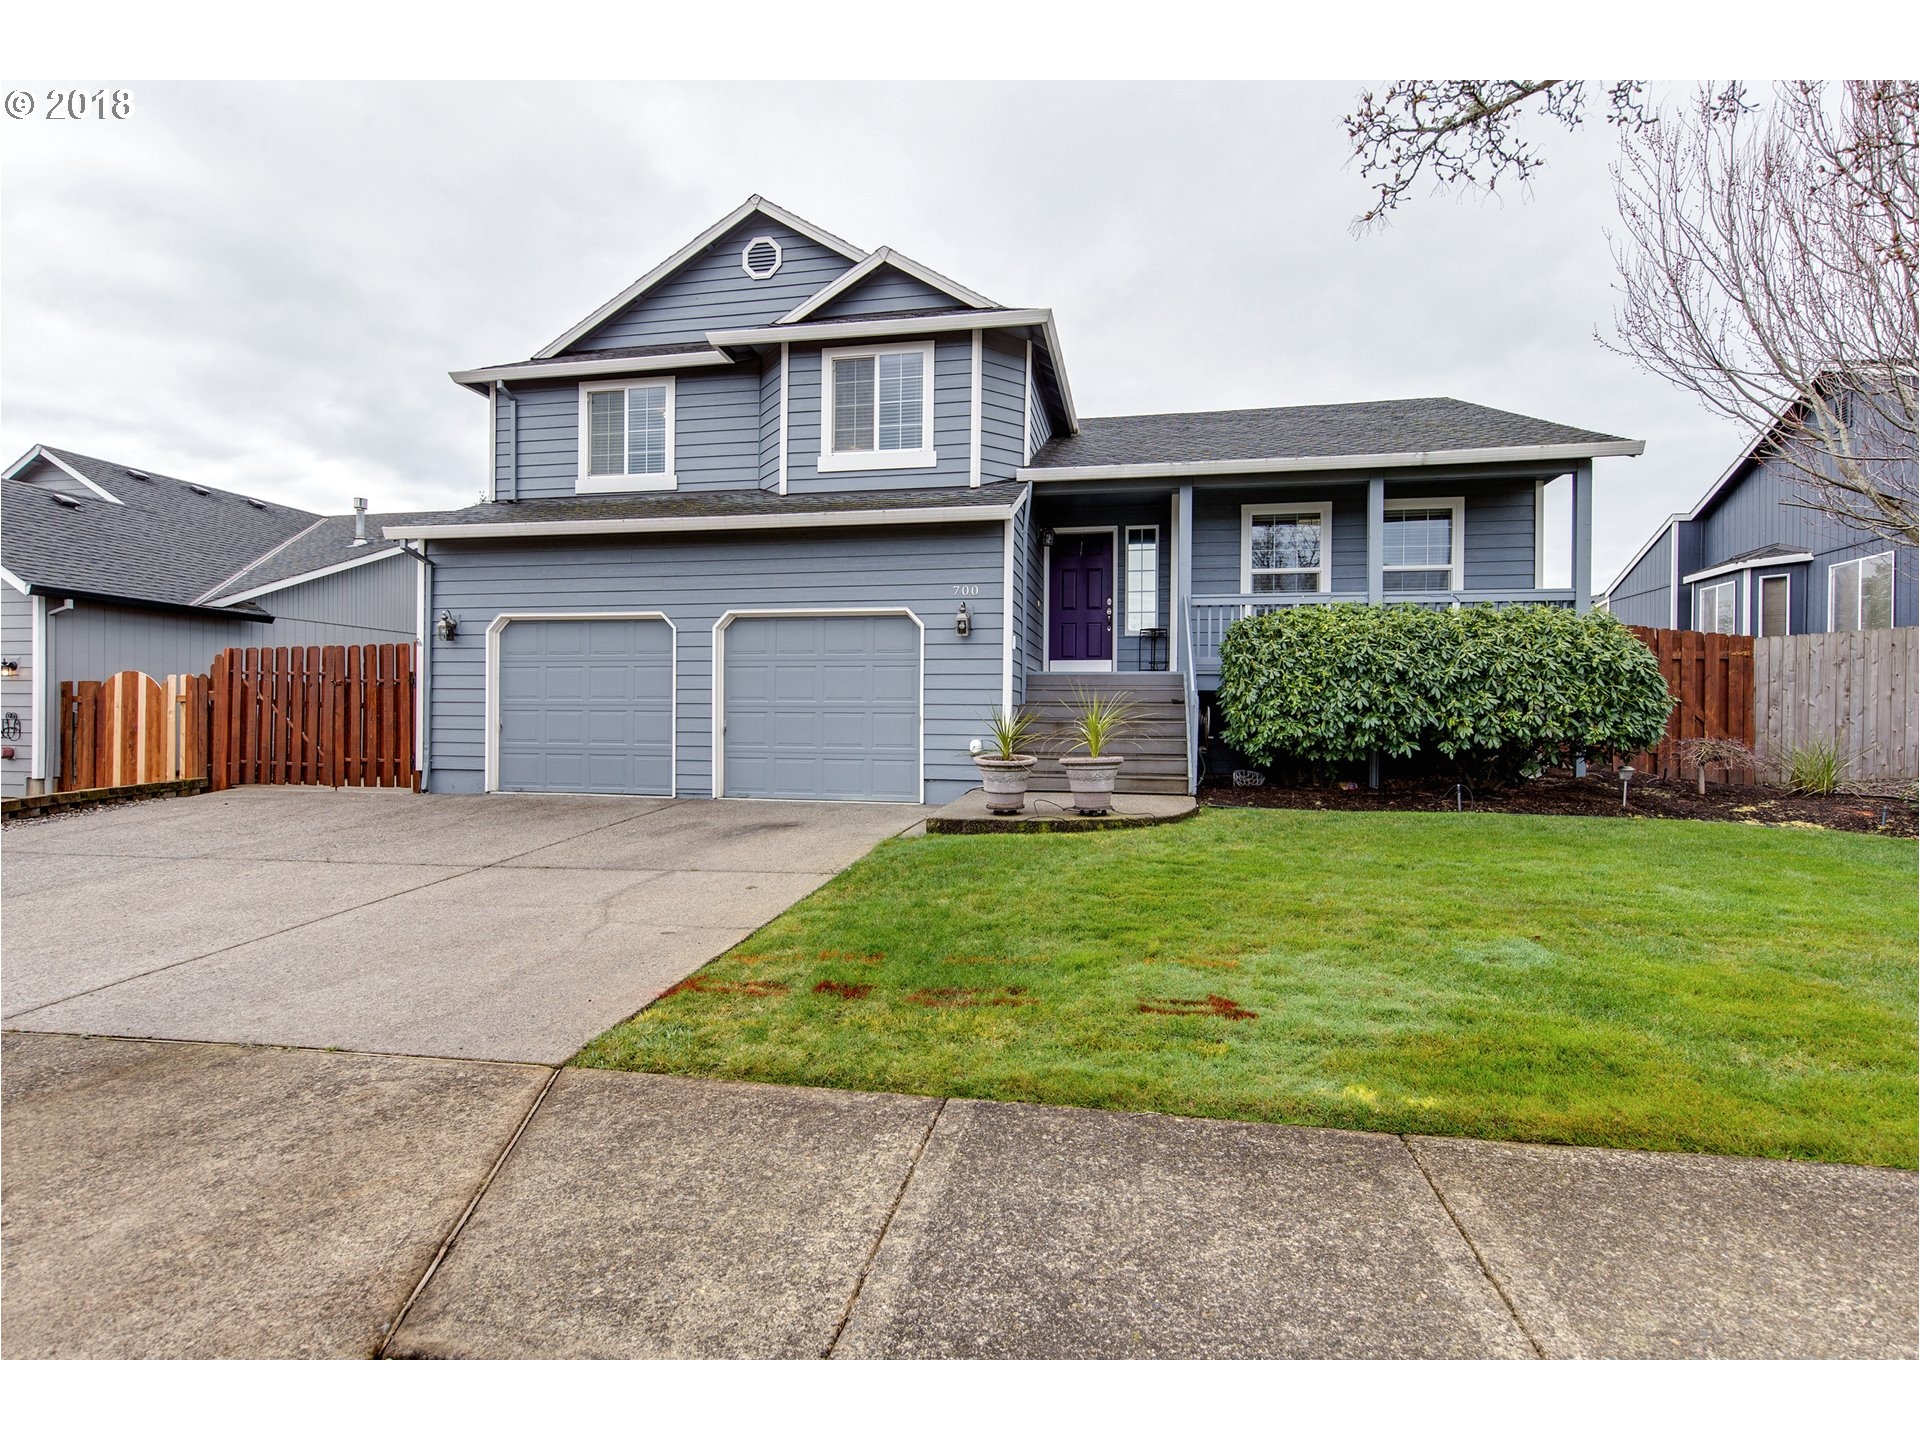 700 se 10th st troutdale or 97060